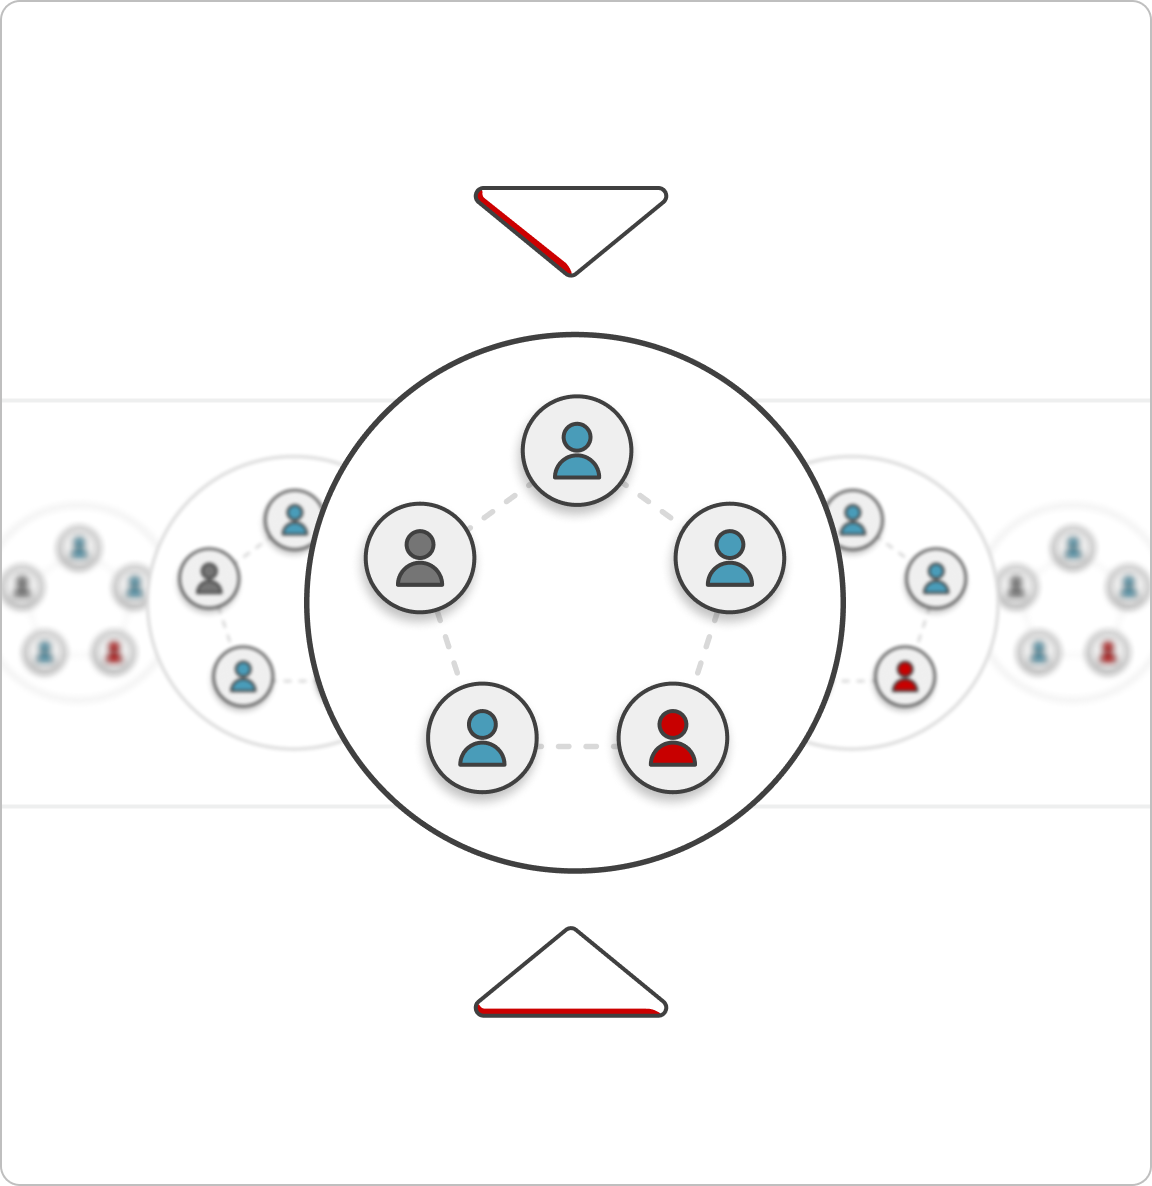 close up of an agile team in a network representing an organization view